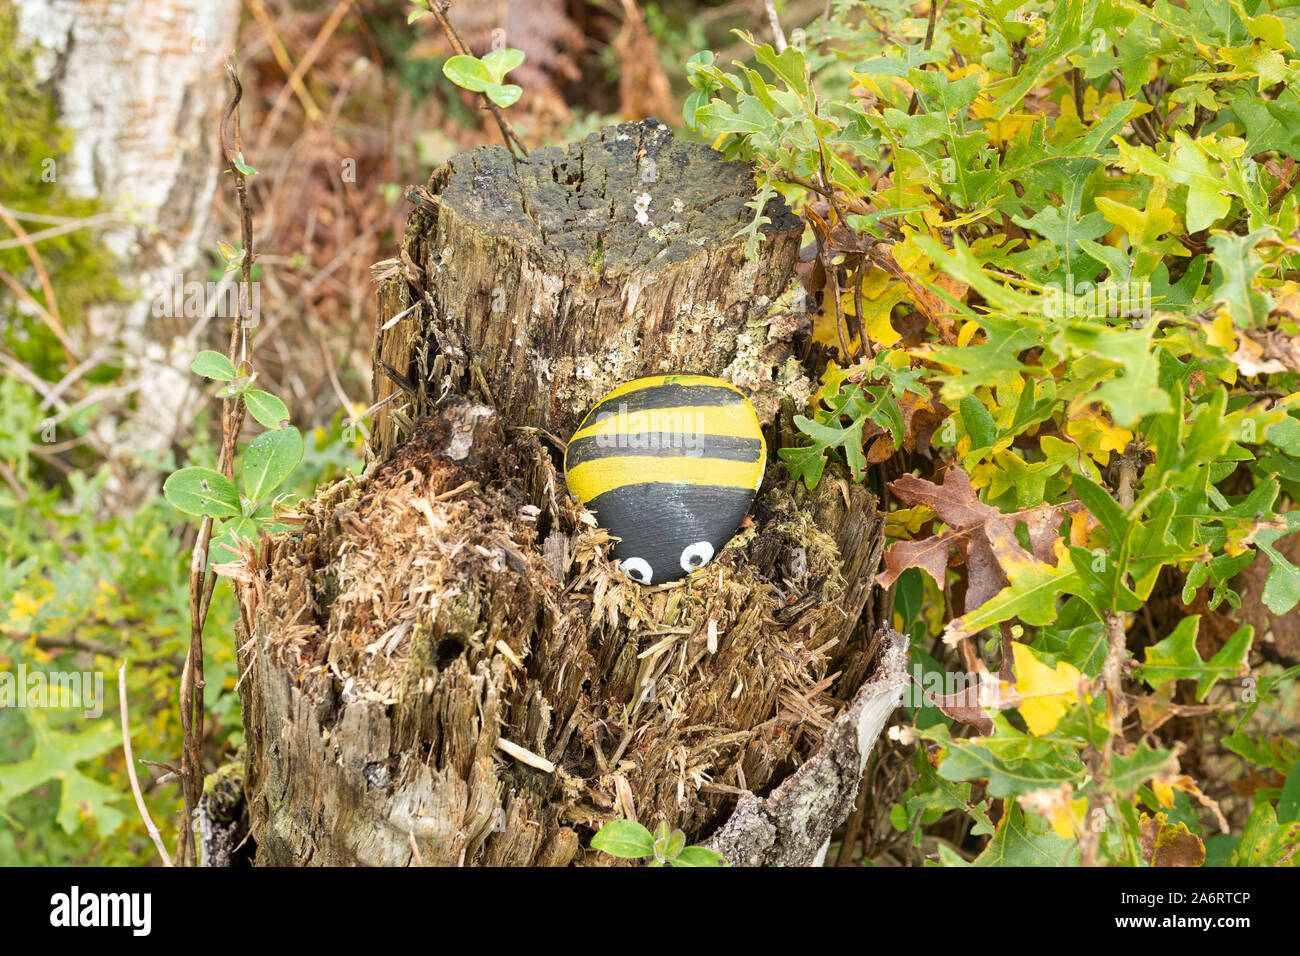 Painted pebble with a bee design with yellow and black stripes left on a tree stump in the countryside, UK. Painted rock craze or trend. Stock Photo